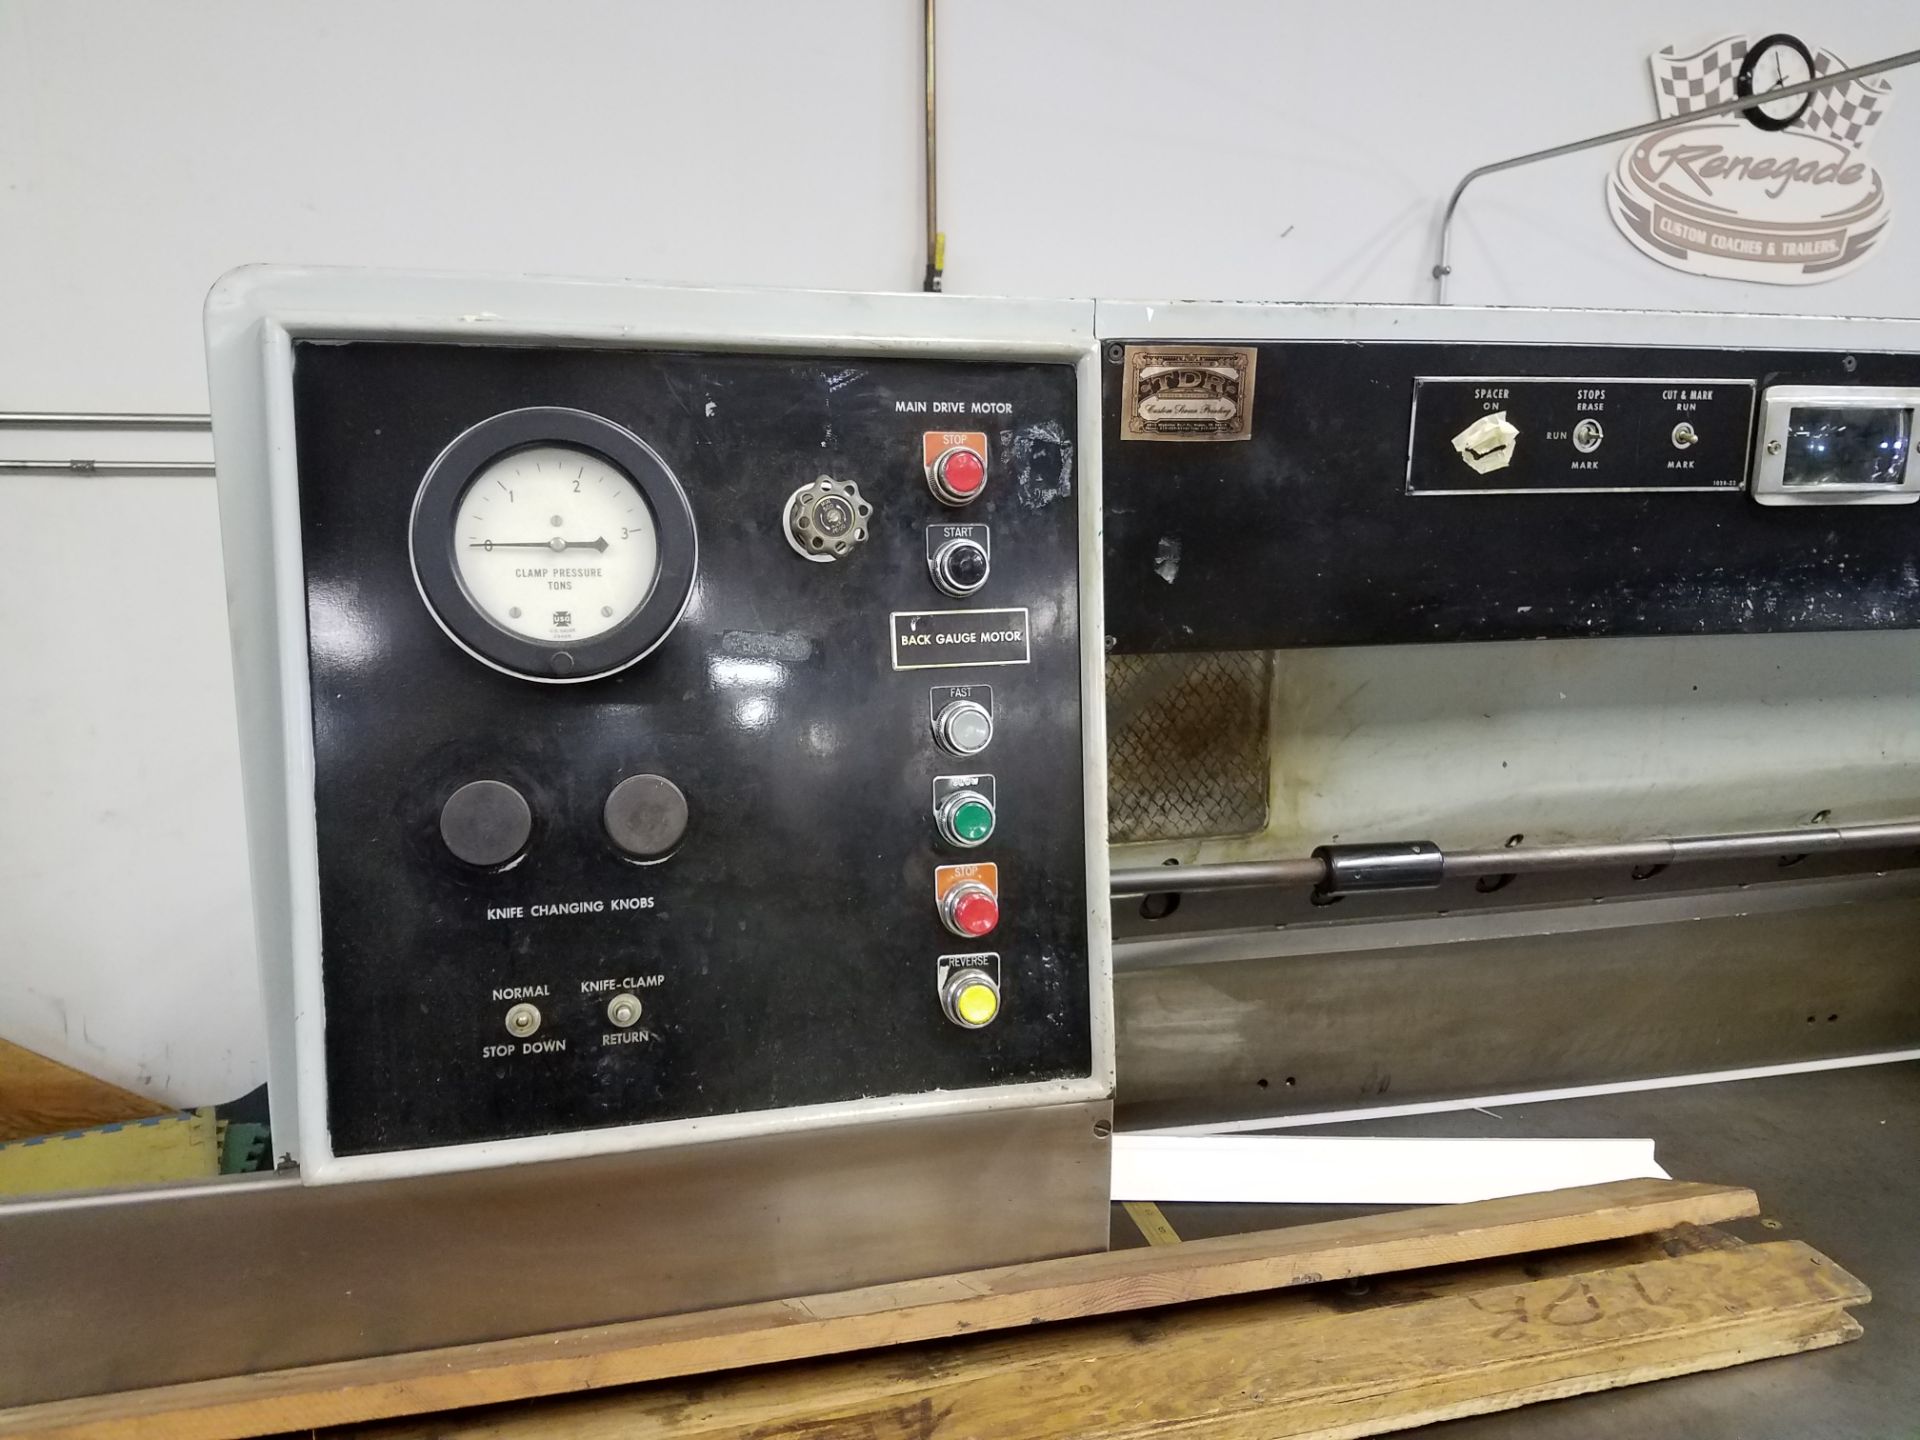 HARRIS INTERTYPE SEYBOLD CITATION PAPER SHEAR 42" MODEL-CLBS, S#5706 W/(3) EXTRA BLADES - Image 2 of 3